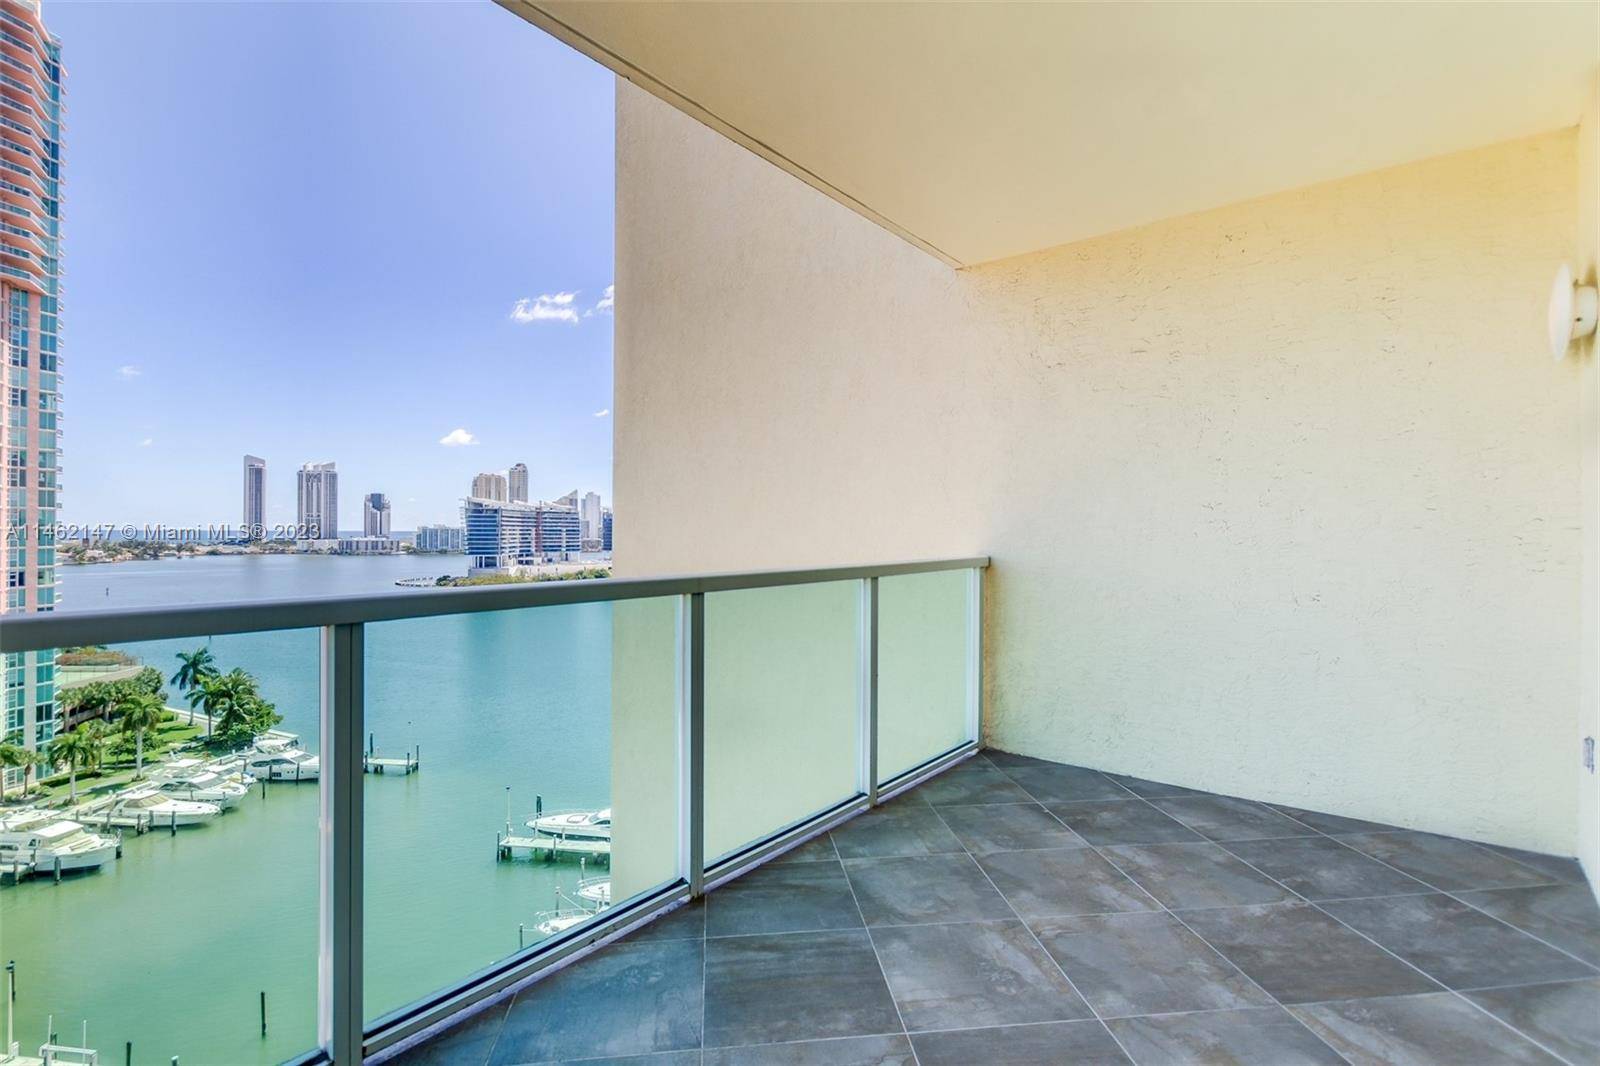 Spectacular apartment in Aventura Marina, completely renovated and all new bathrooms !